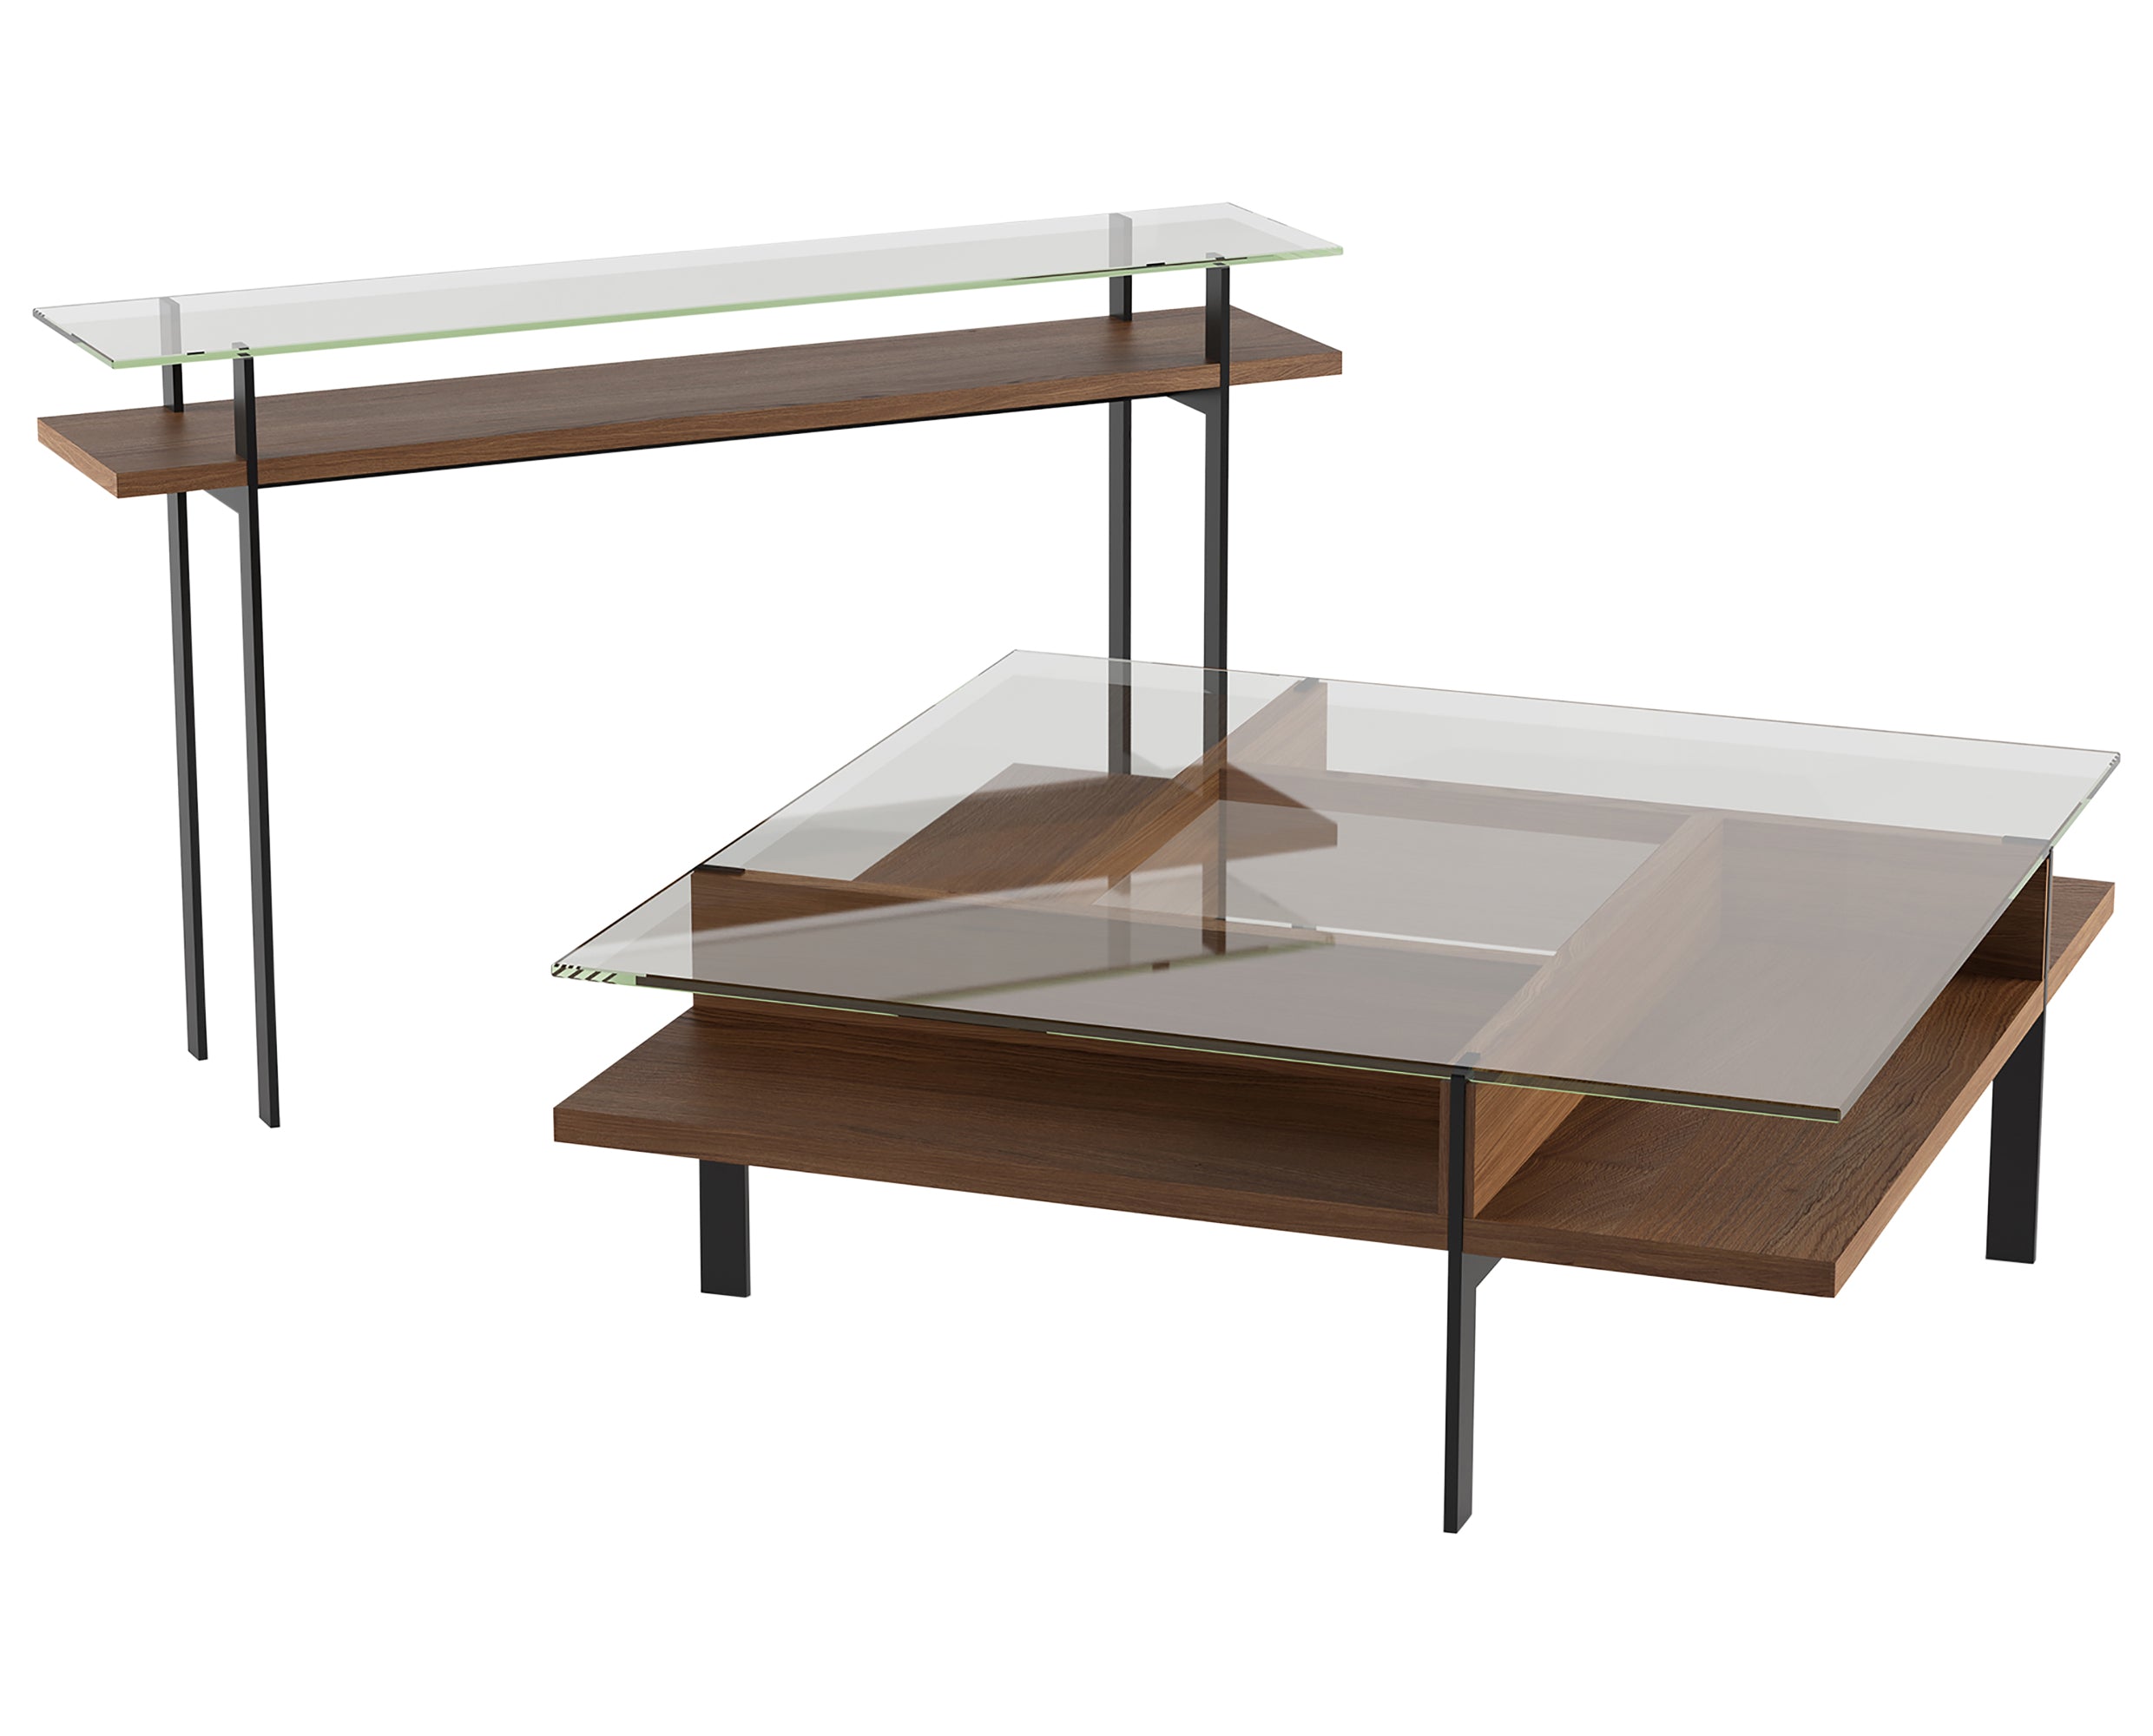 Natural Walnut Veneer & Polished Tempered Glass with Black Steel | BDI Terrace Slim Console Table | Valley Ridge Furniture